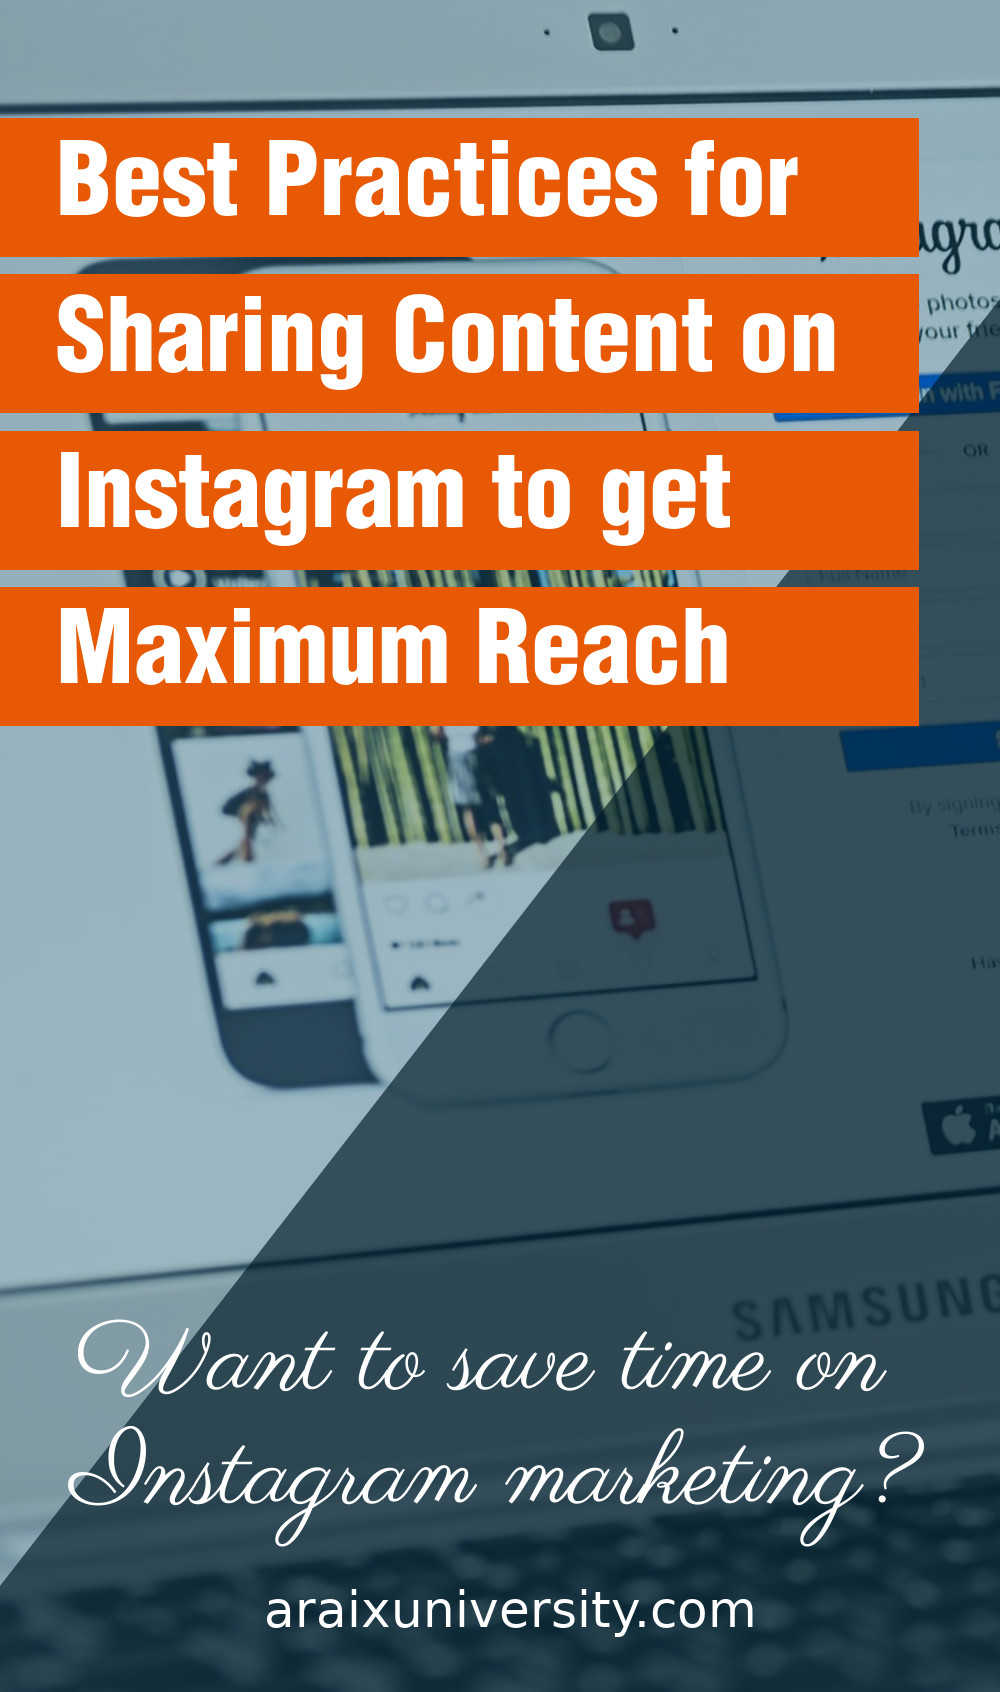 Best Practices for Sharing Content on Instagram to get Maximum Reach